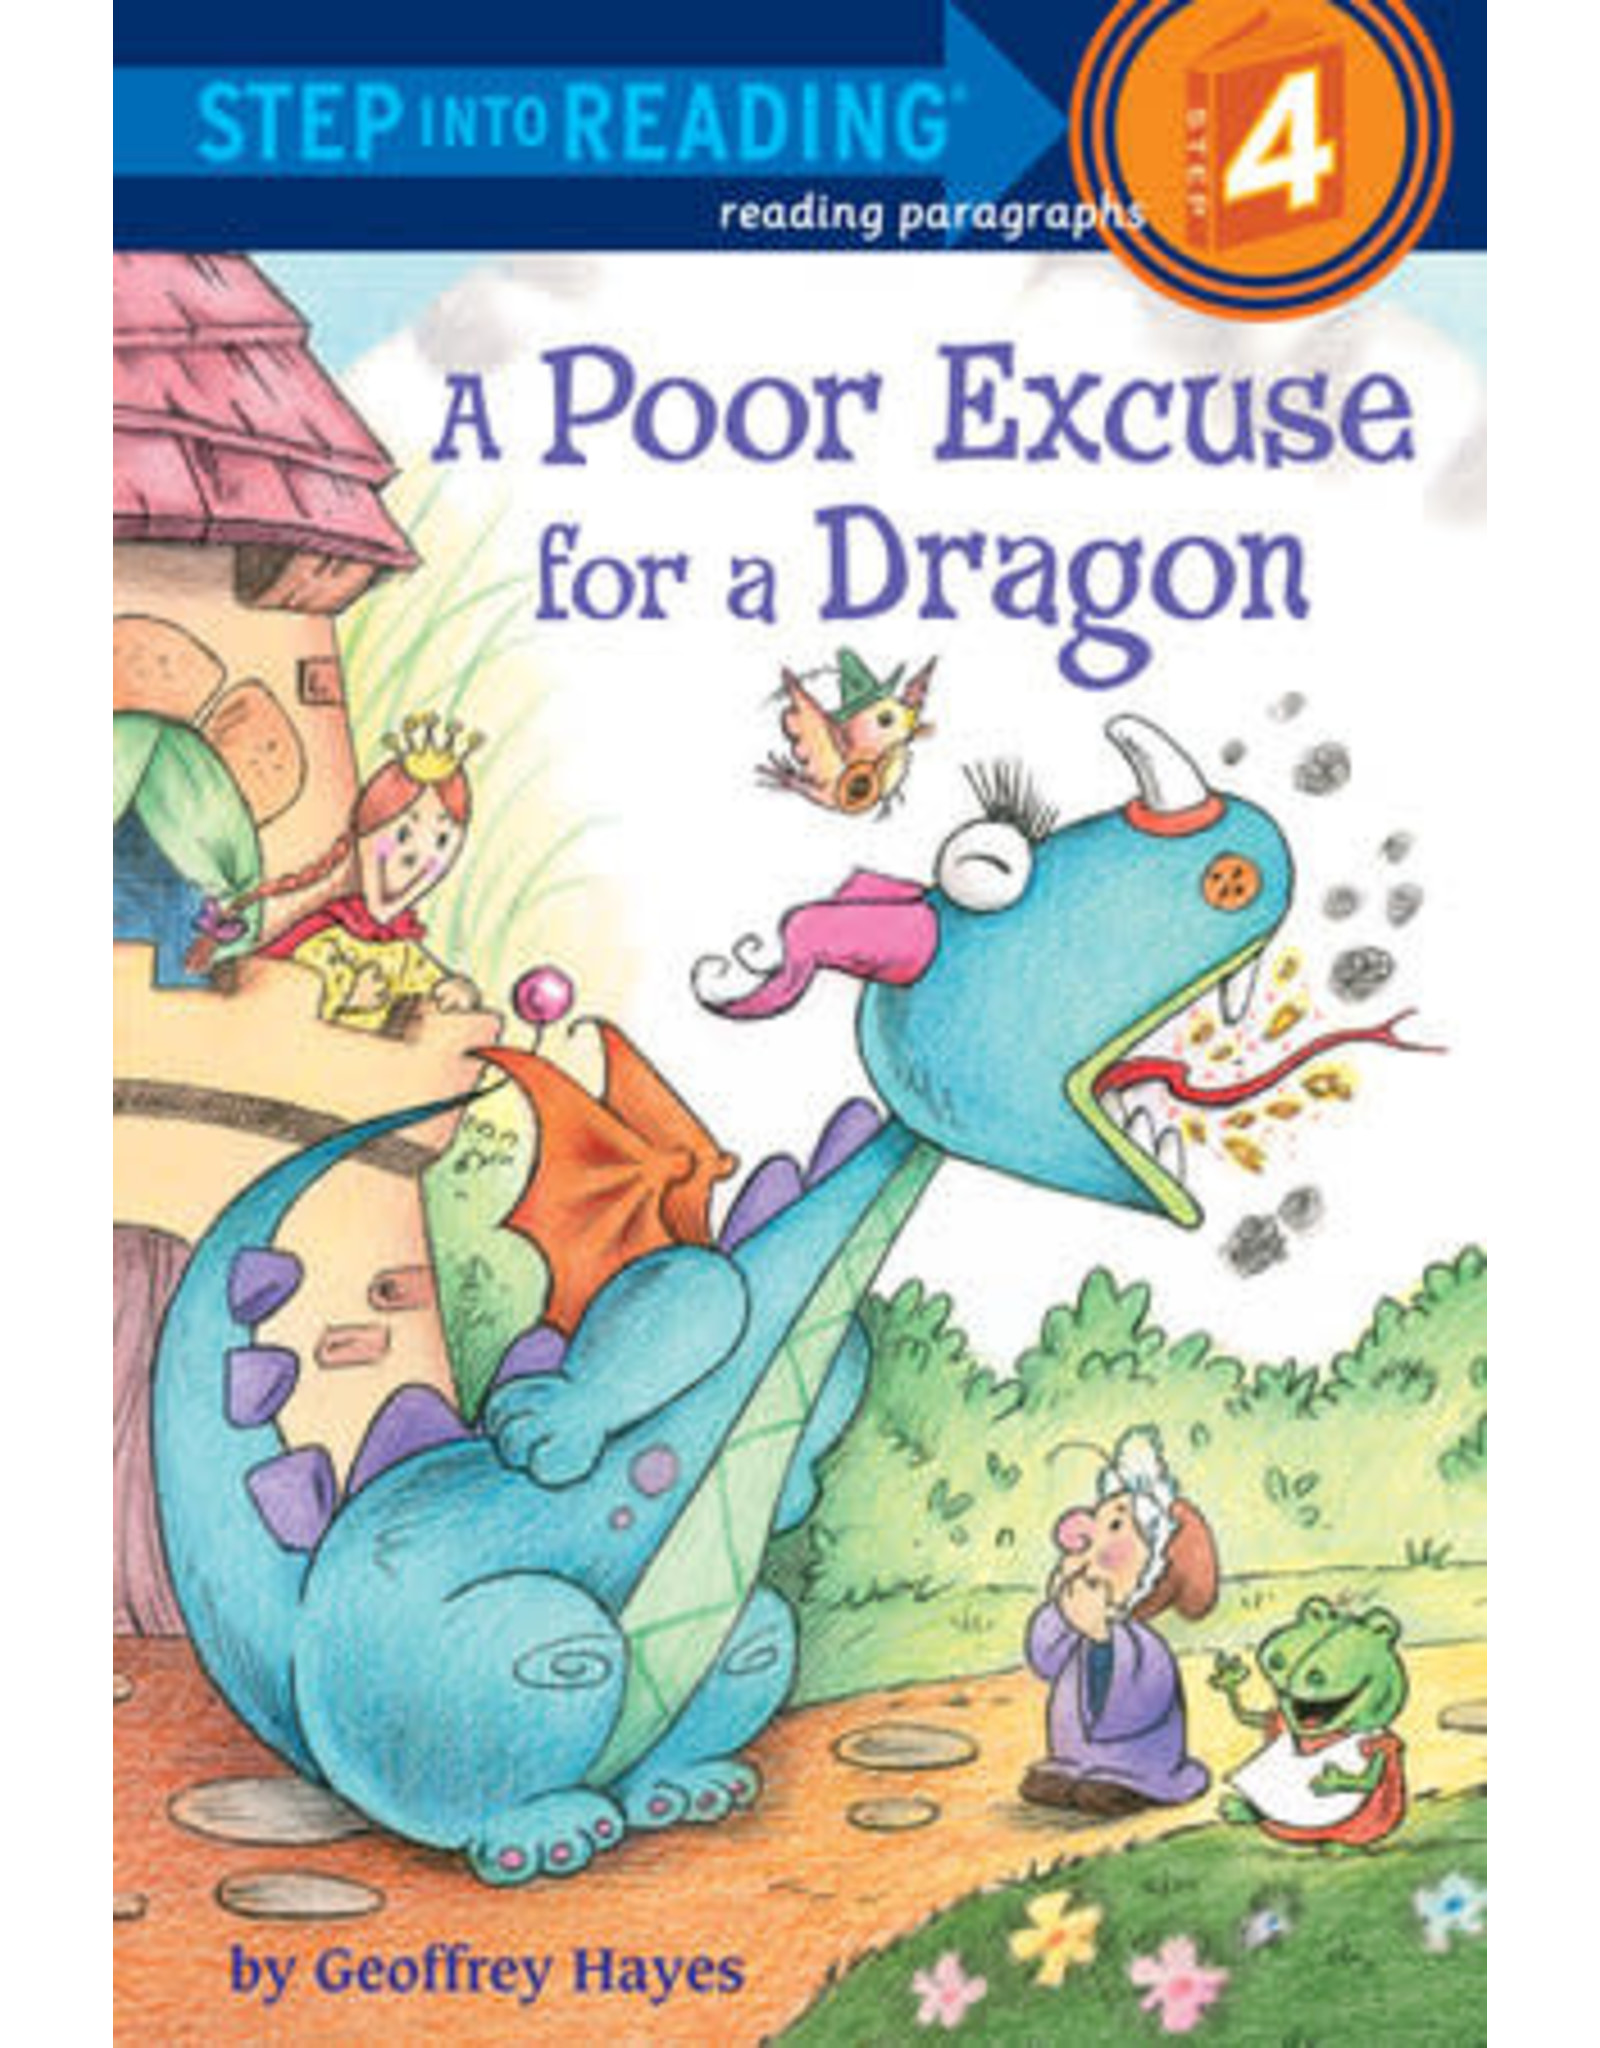 Step Into Reading Step Into Reading - A Poor Excuse for a Dragon (Step 4)